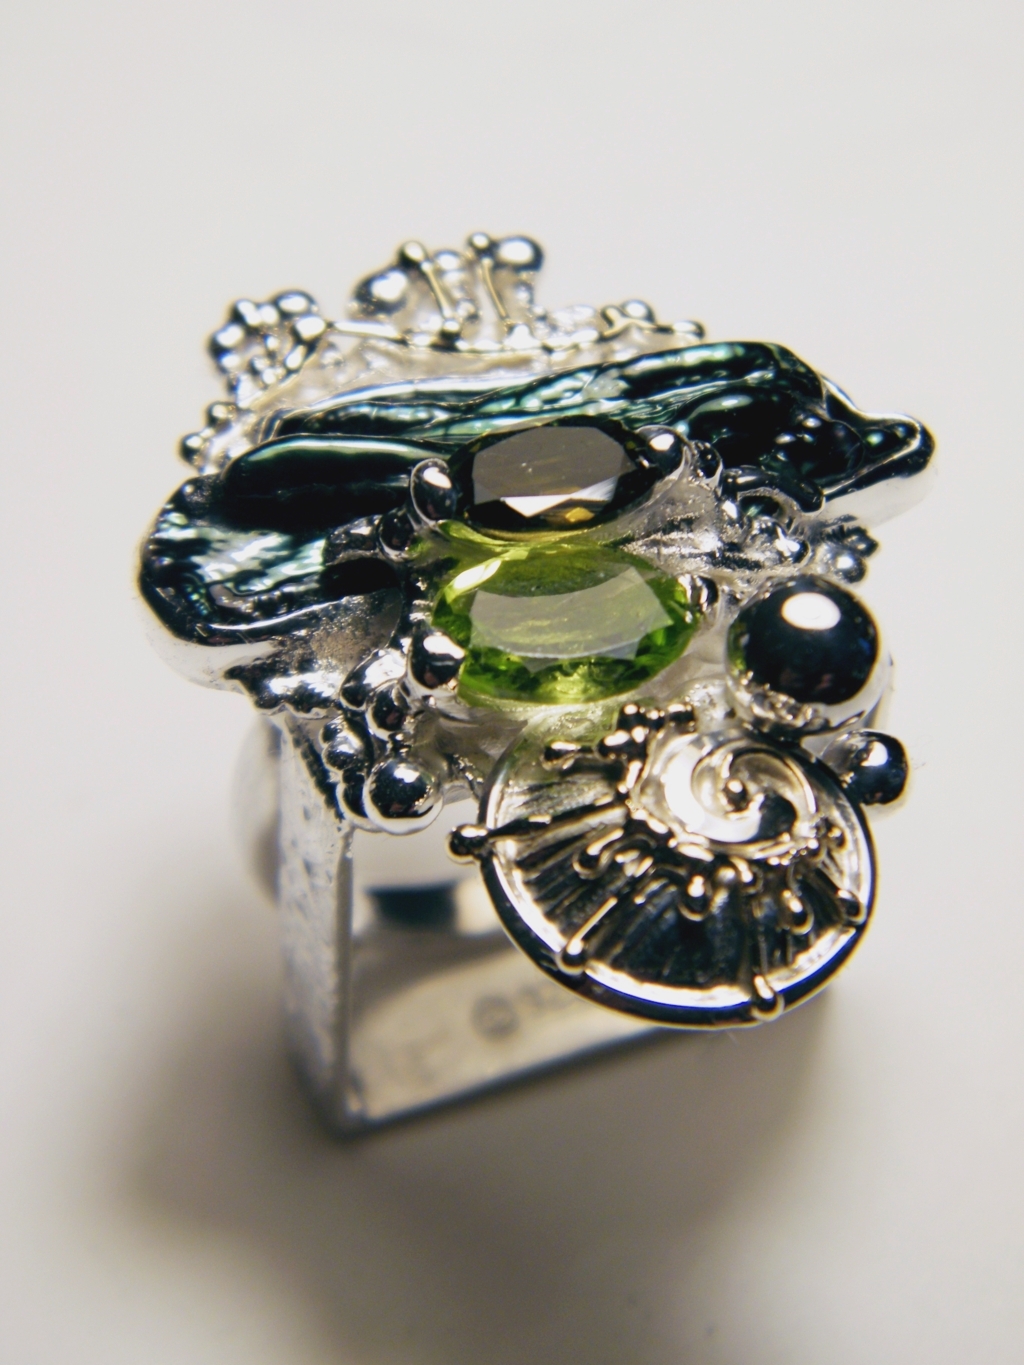 jewellery in art and craft galleries, jewellery and rings shown in international jewellery shows and fairs, one of a kind rings handmade by artist, gregory pyra piro one of a kind square ring #1080, square ring with green tourmaline and peridot, one of a kind ring handmade by artist with green tourmaline and biwa pearl